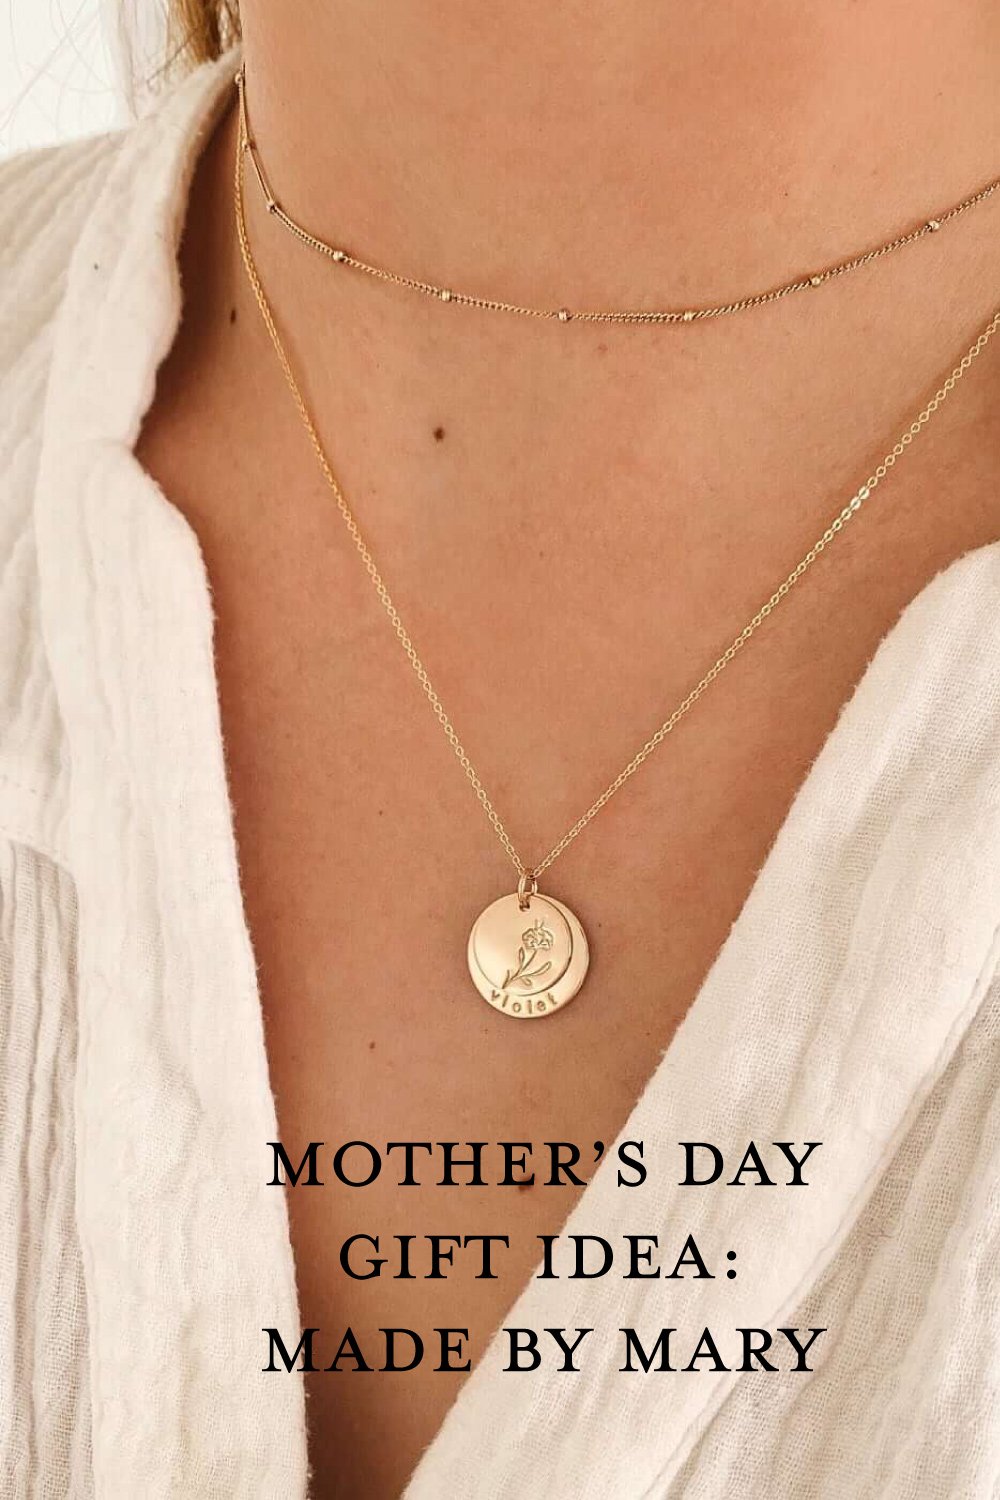  Take a look at this gift guide for the perfect Mother’s Day gifts for the women in your life. #mangumdesignco #mothersdaygiftguide #mothersday #giftidea #sentimentalgifts #customgiftideas #customillustrations #personalizedjewelry 